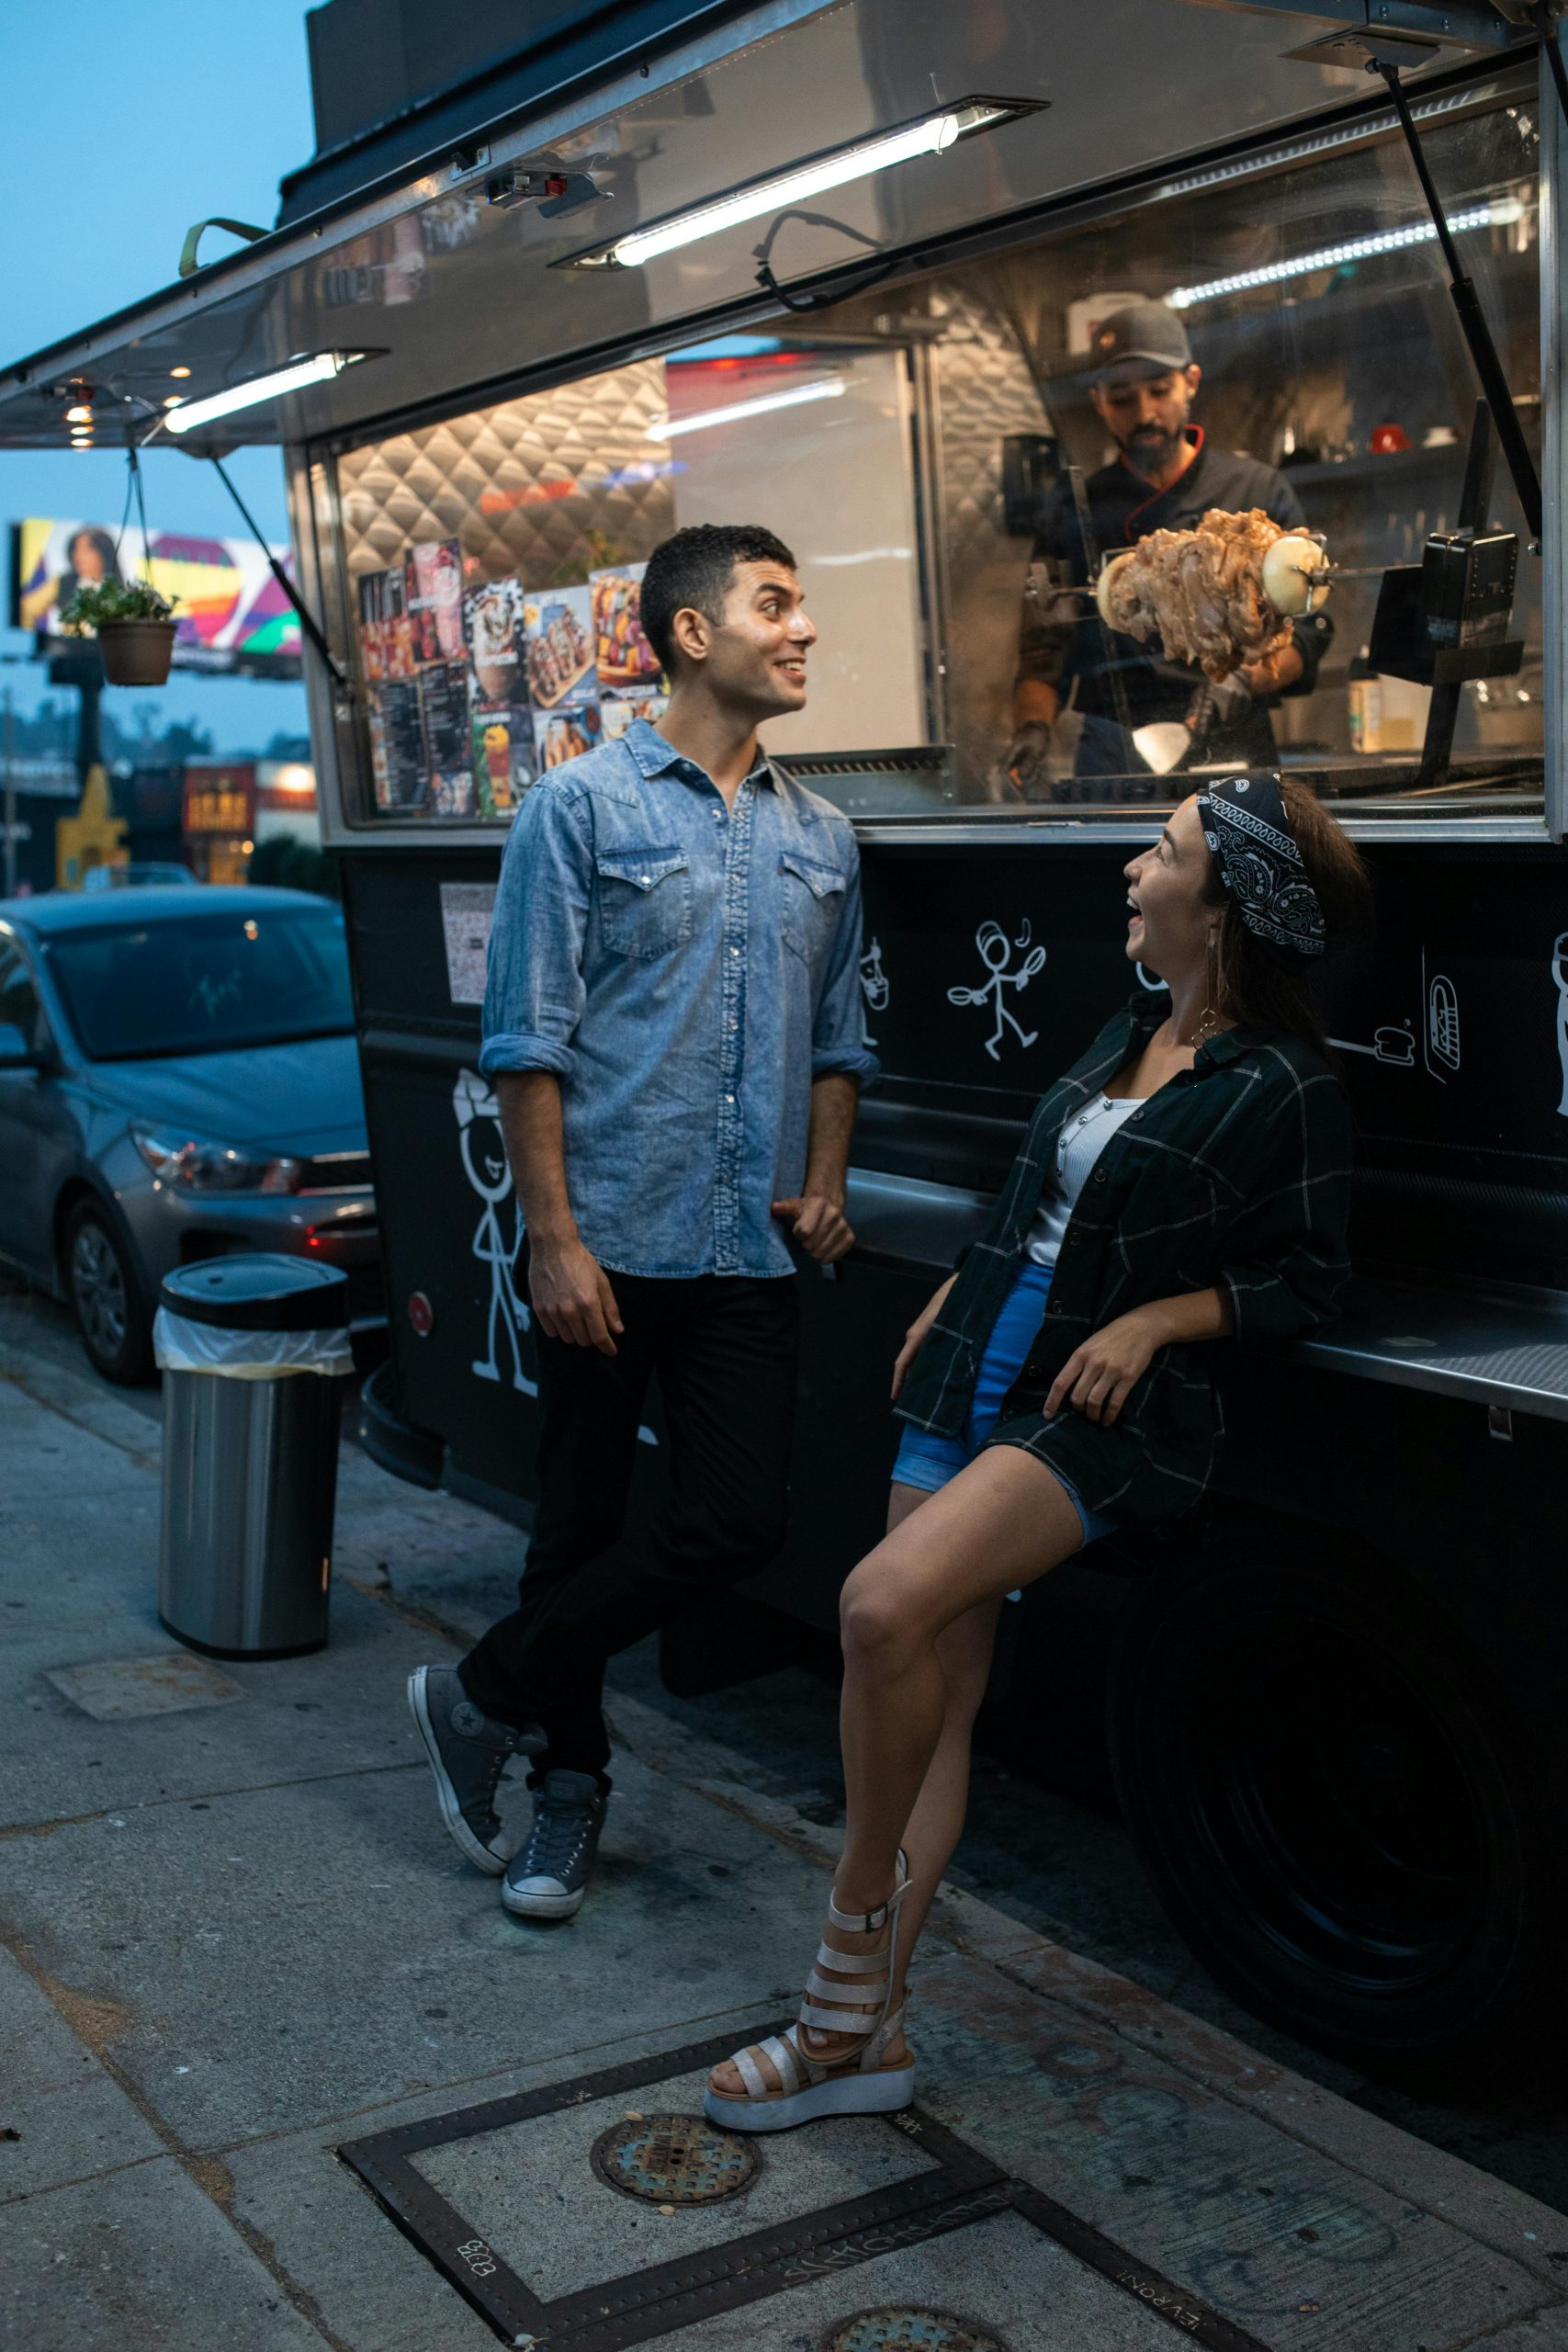 Couple ordering Food from a Food Truck